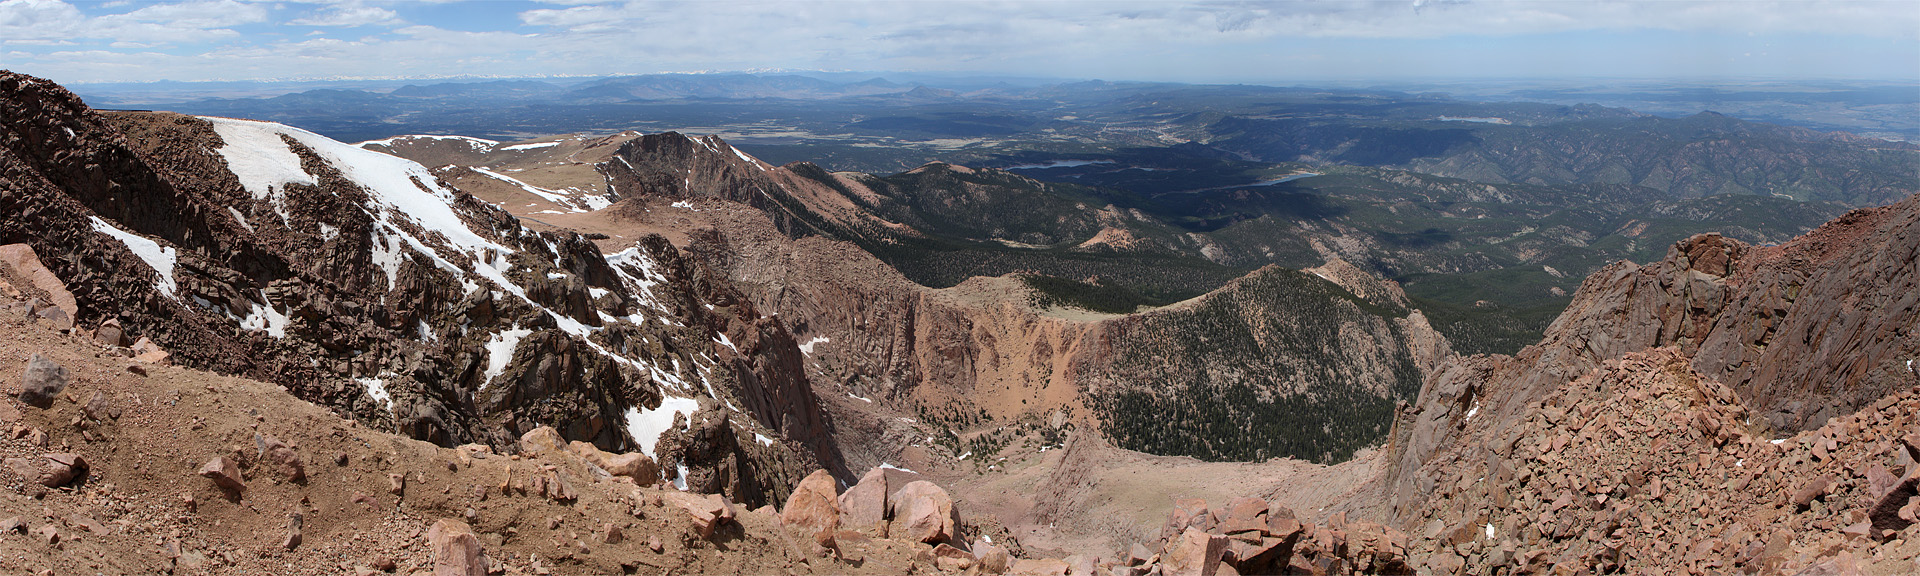 View from the Pikes Peak, CO, USA